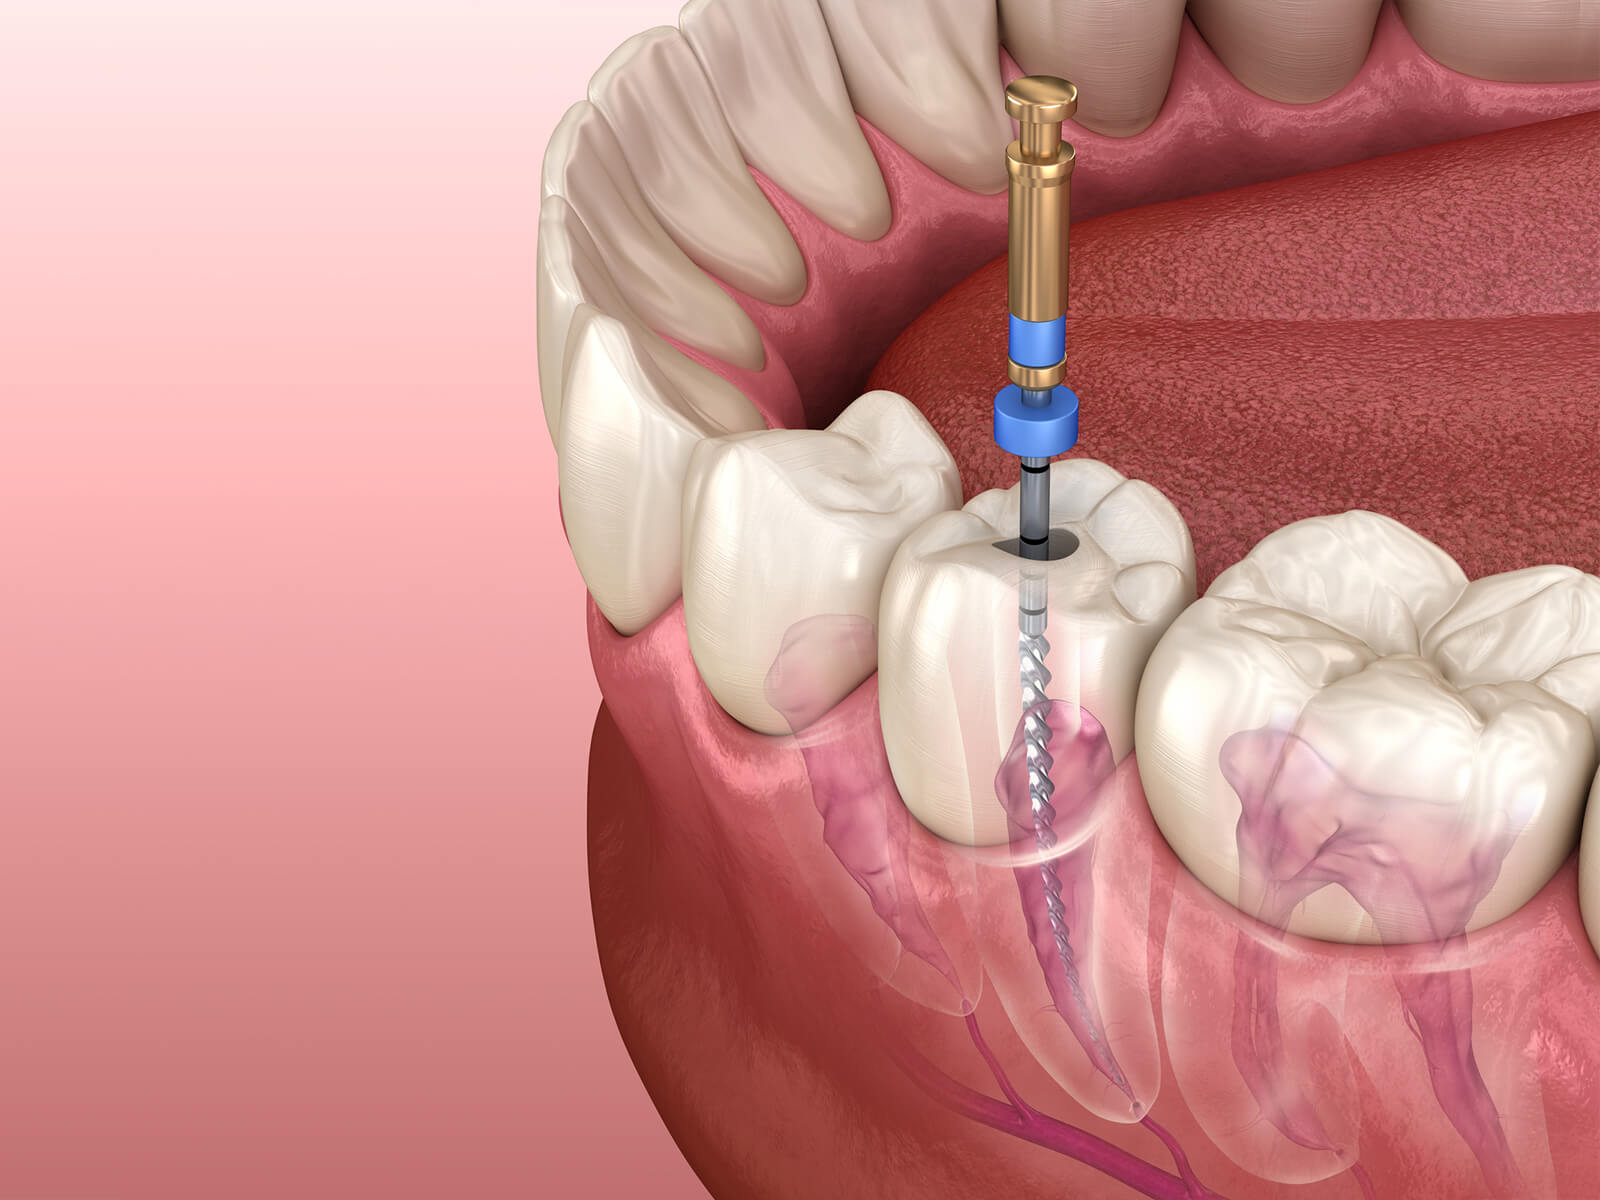 What are the risks of root canal?